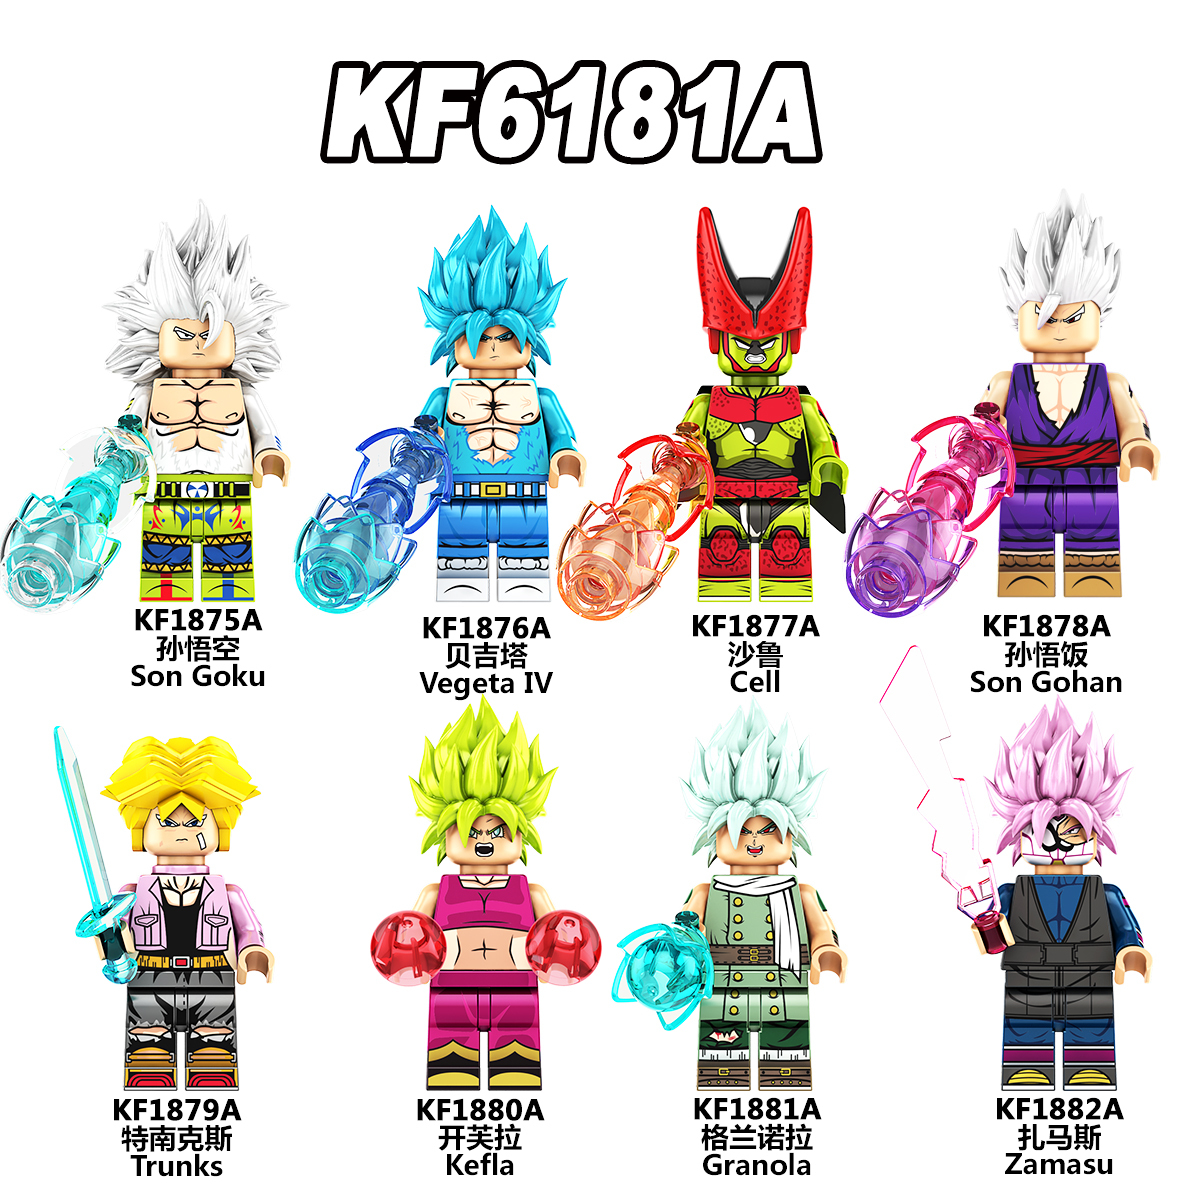 KF6181A KF1875A KF1876A KF1877A KF1878A KF1879A KF1880A KF1881A KF1882A Dragon Ball Z Anime Series Building Blocks Action Figures Educational Collection Toys For Kids